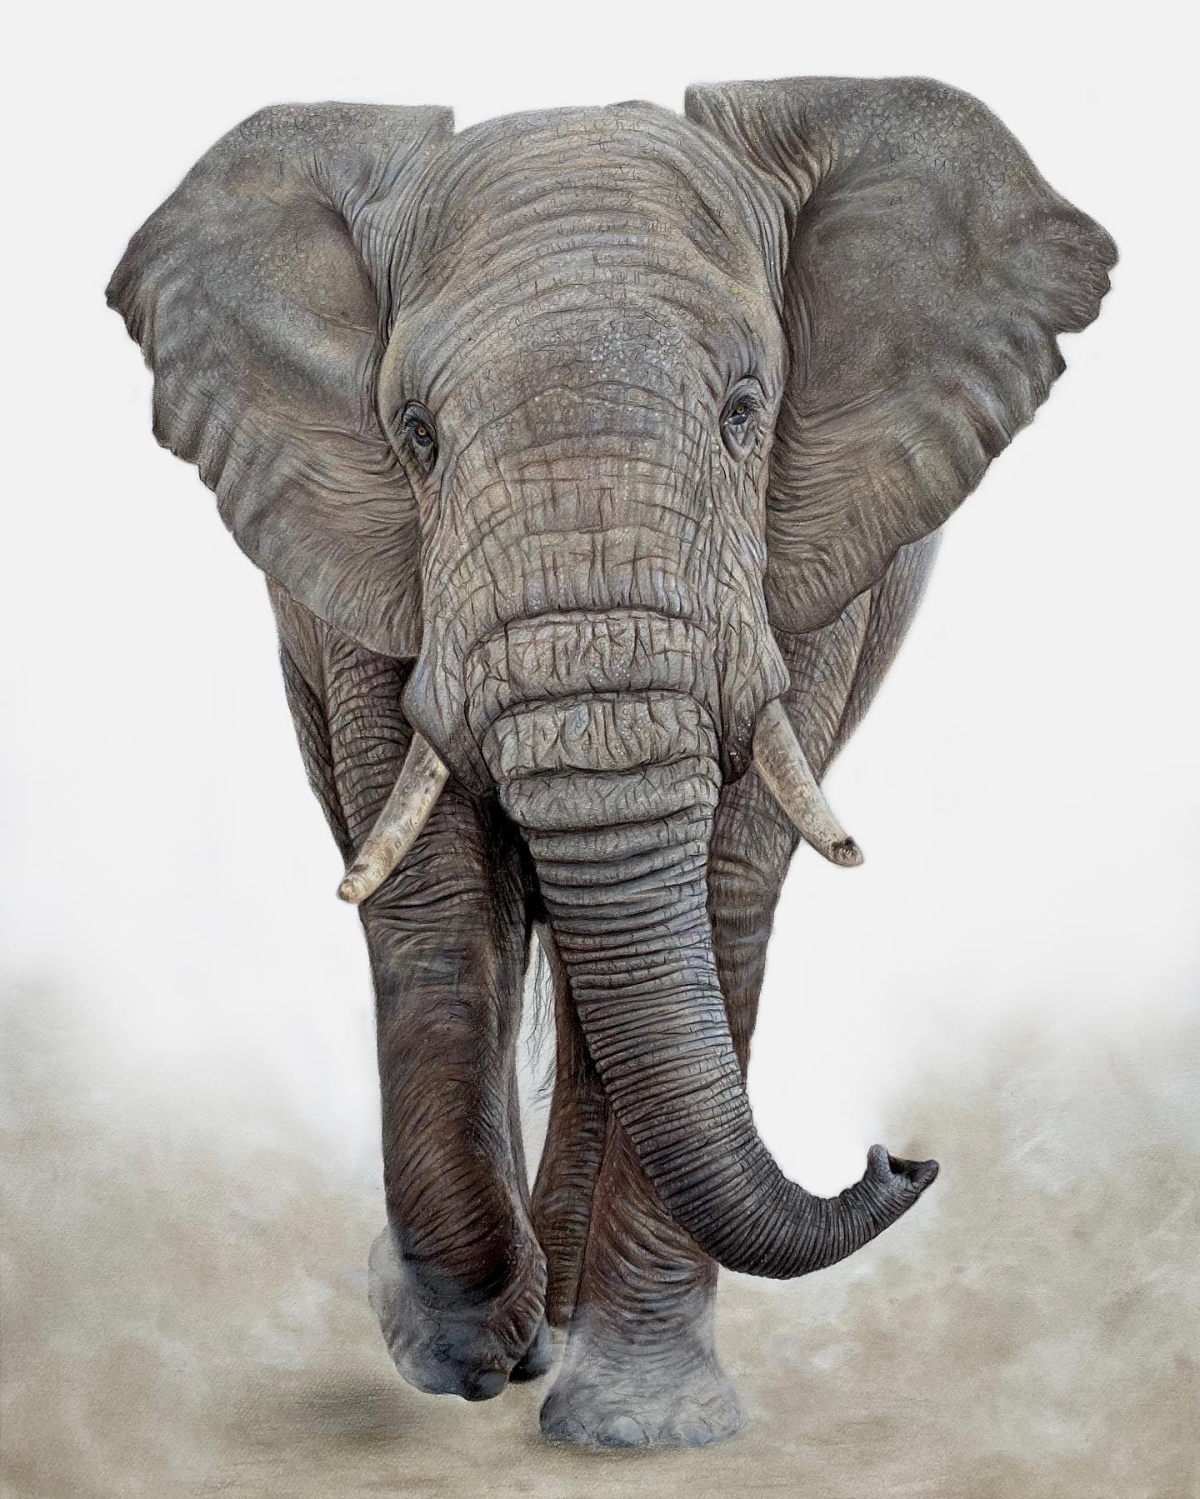 hyperrealistic drawing of an elephant